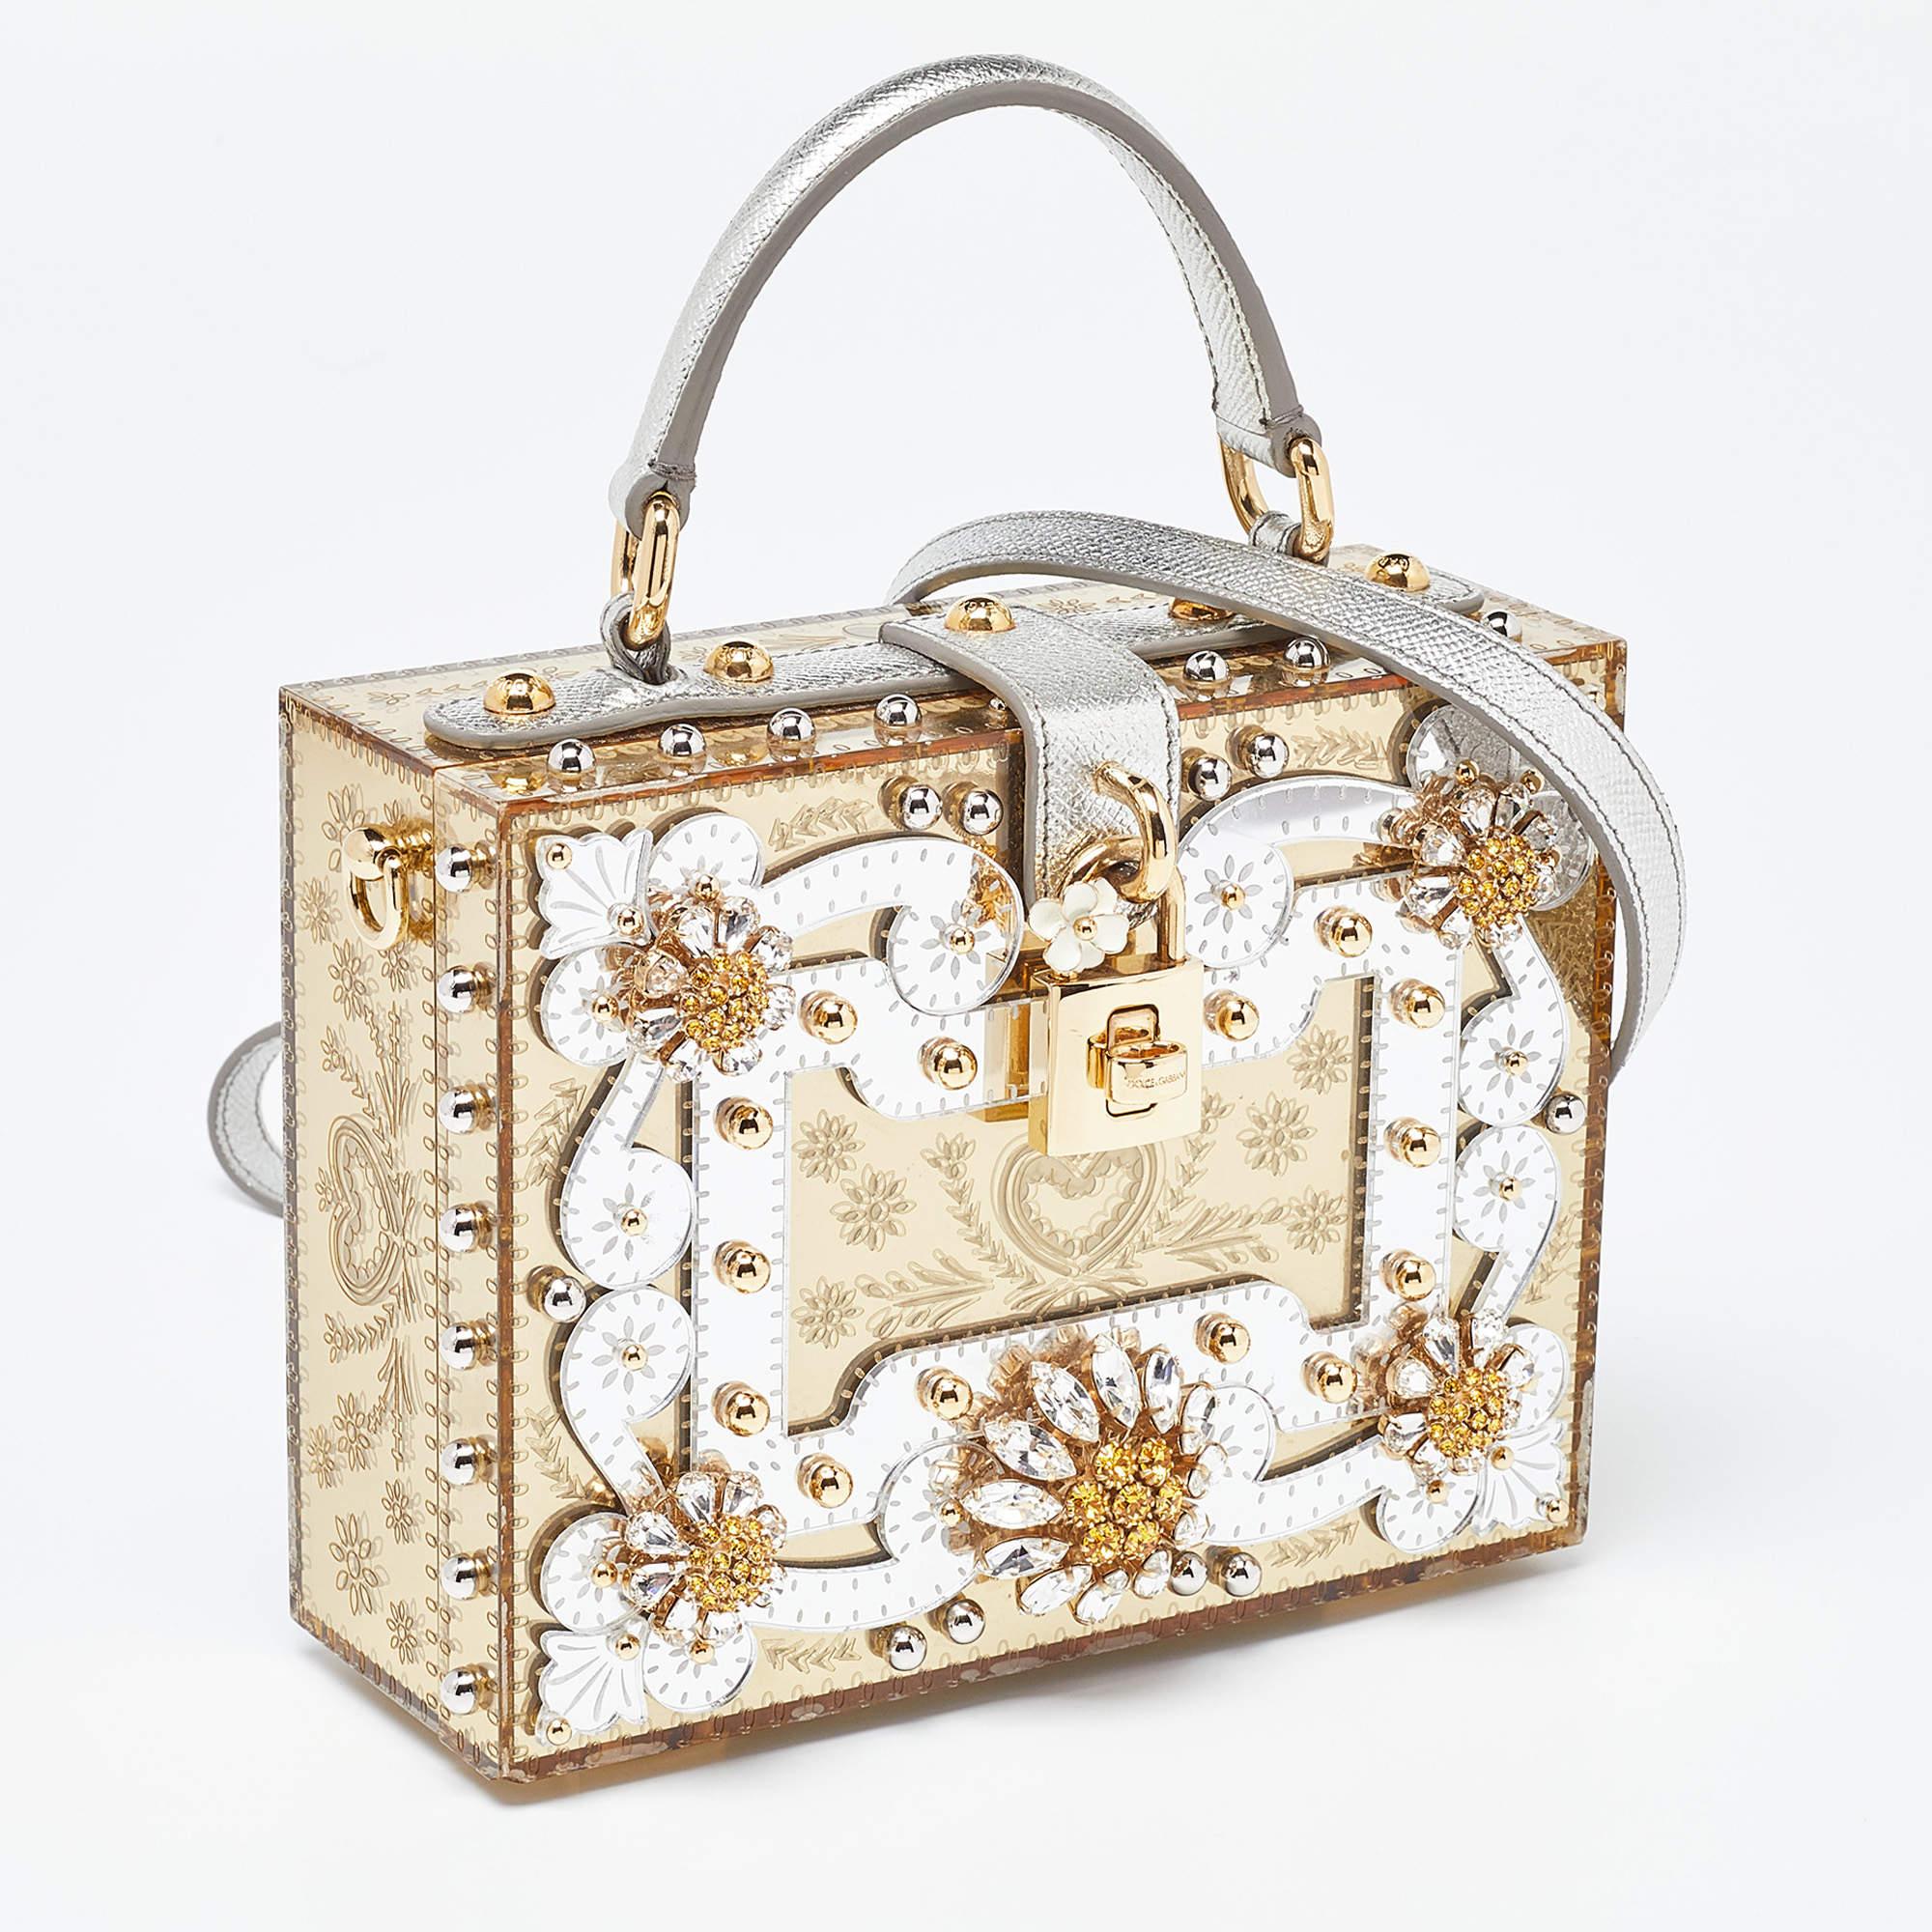 Dolce & Gabbana Gold Acrylic and Leather Crystal Embellished Dolce Box Bag In Good Condition For Sale In Dubai, Al Qouz 2